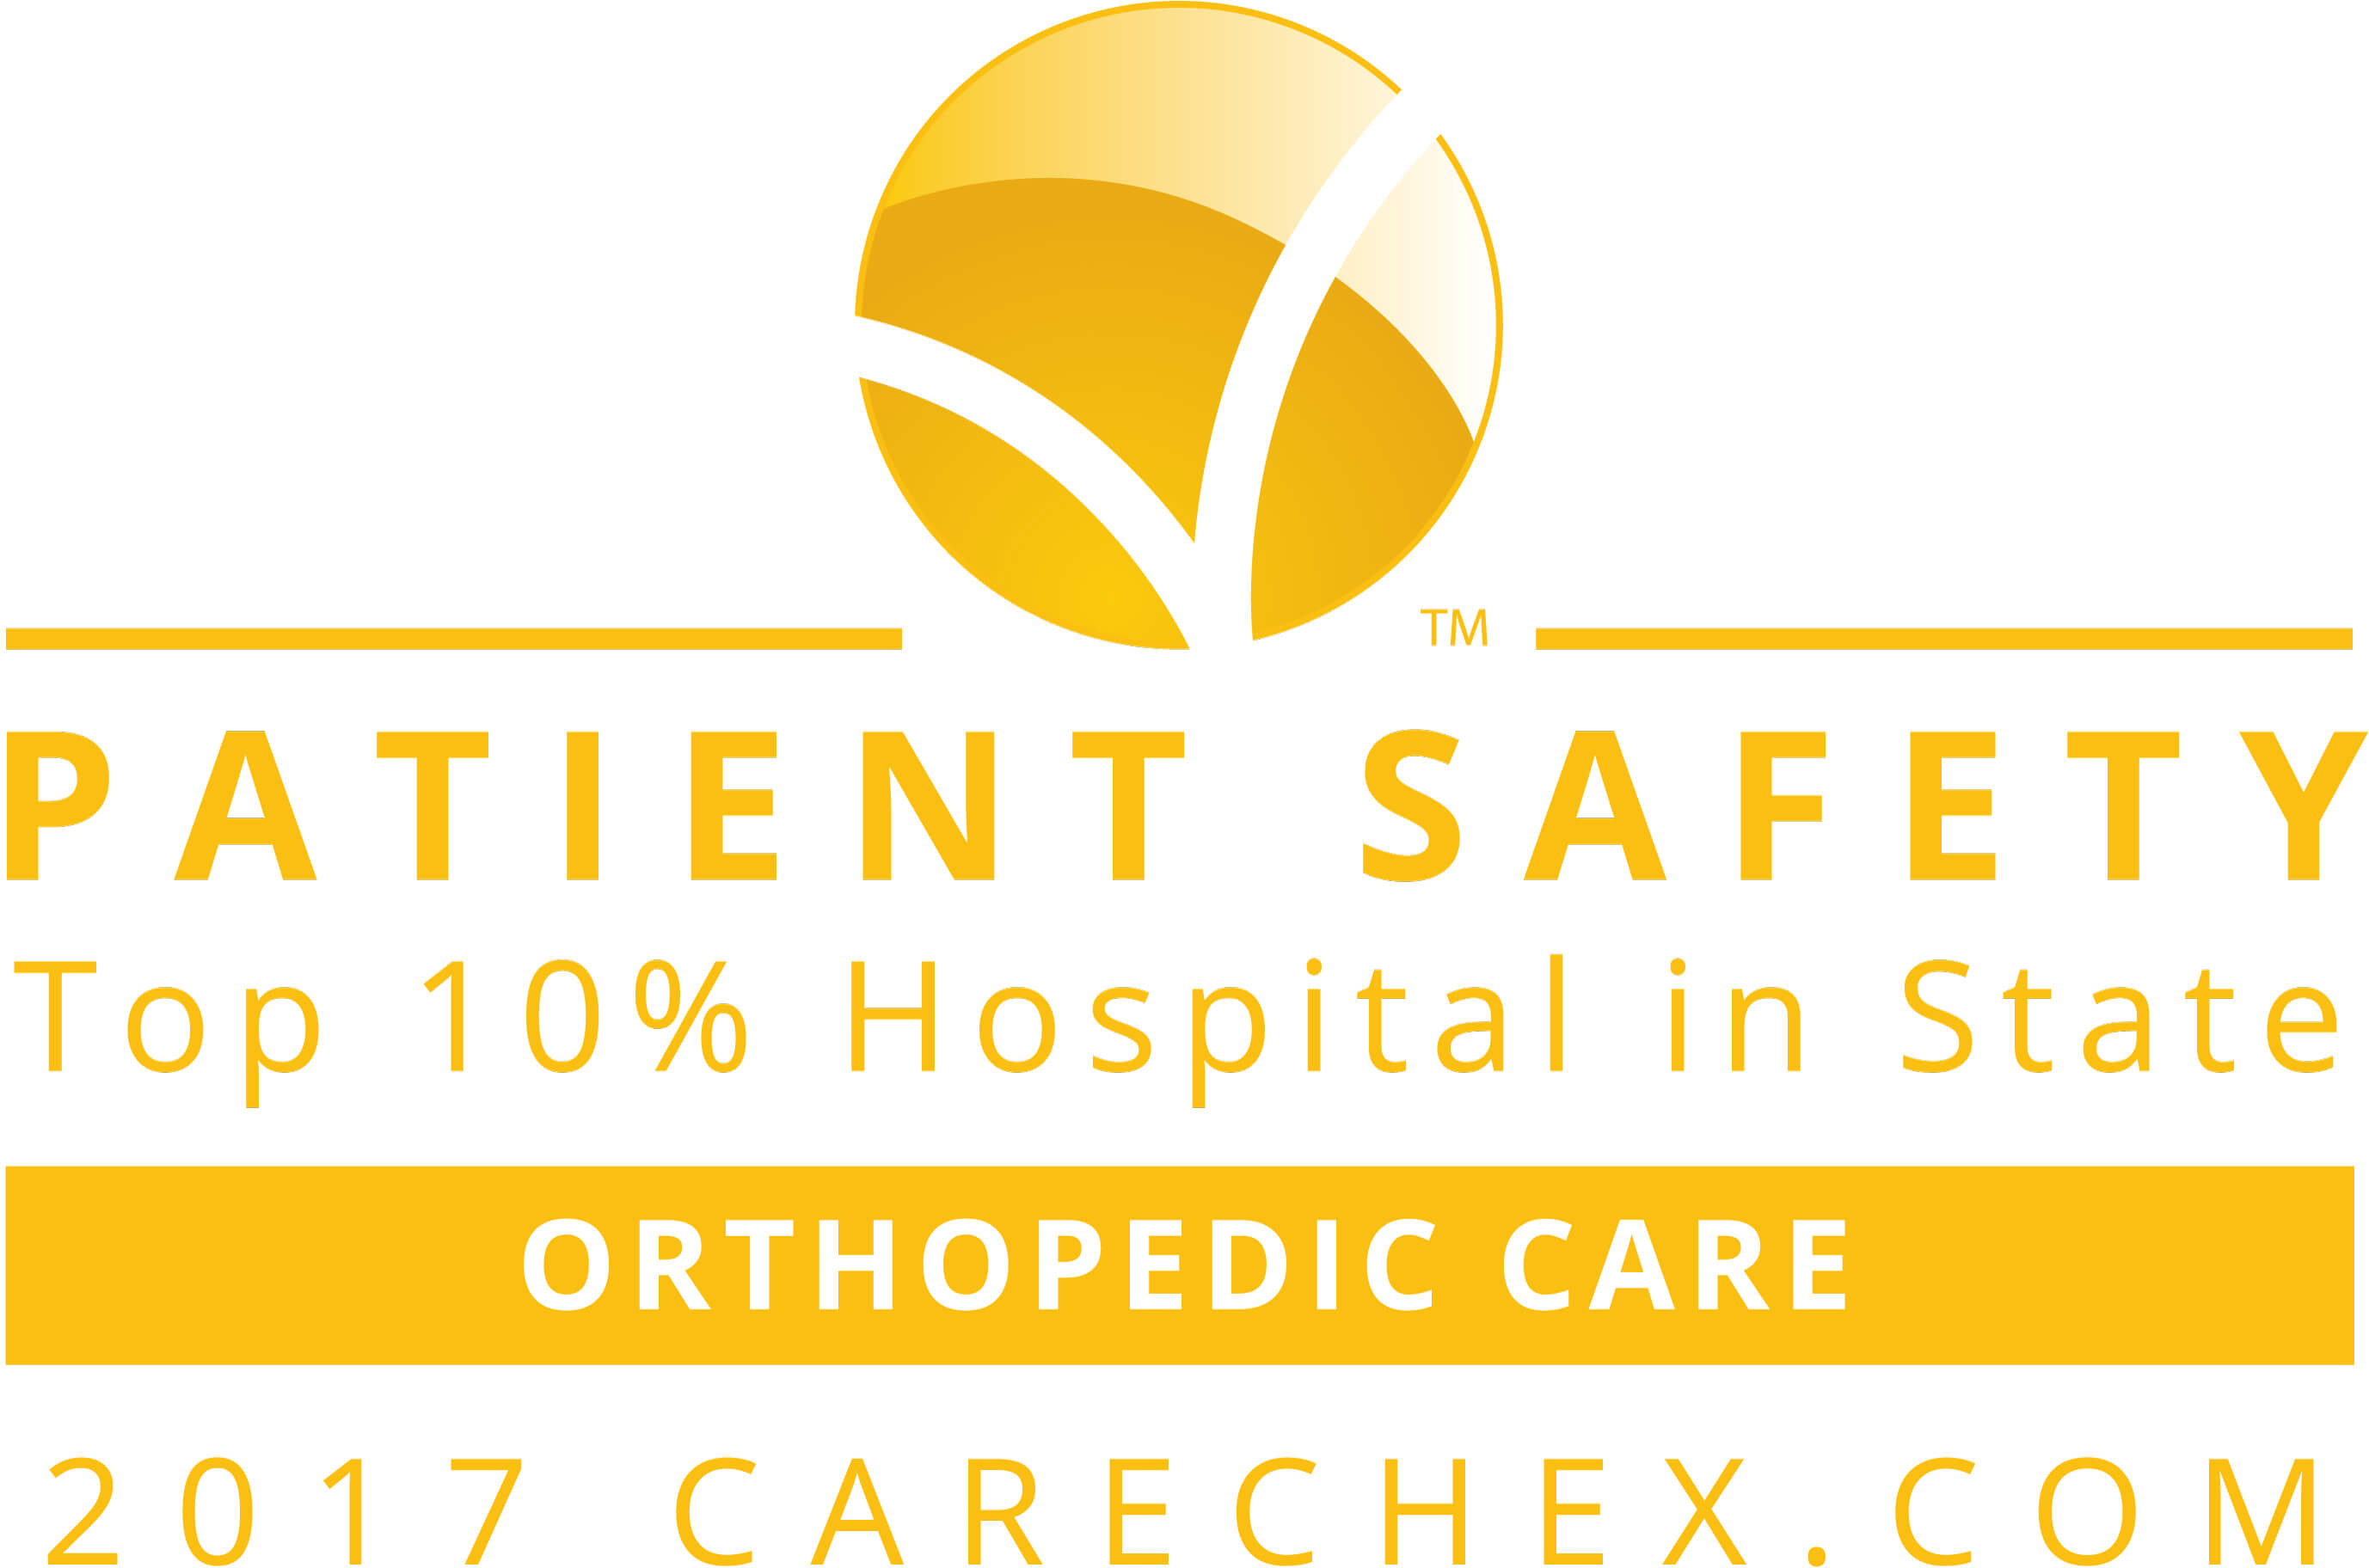 2017 CareCheck Top 10% Hospitals in State for Patient Safety - Orthopedic Care